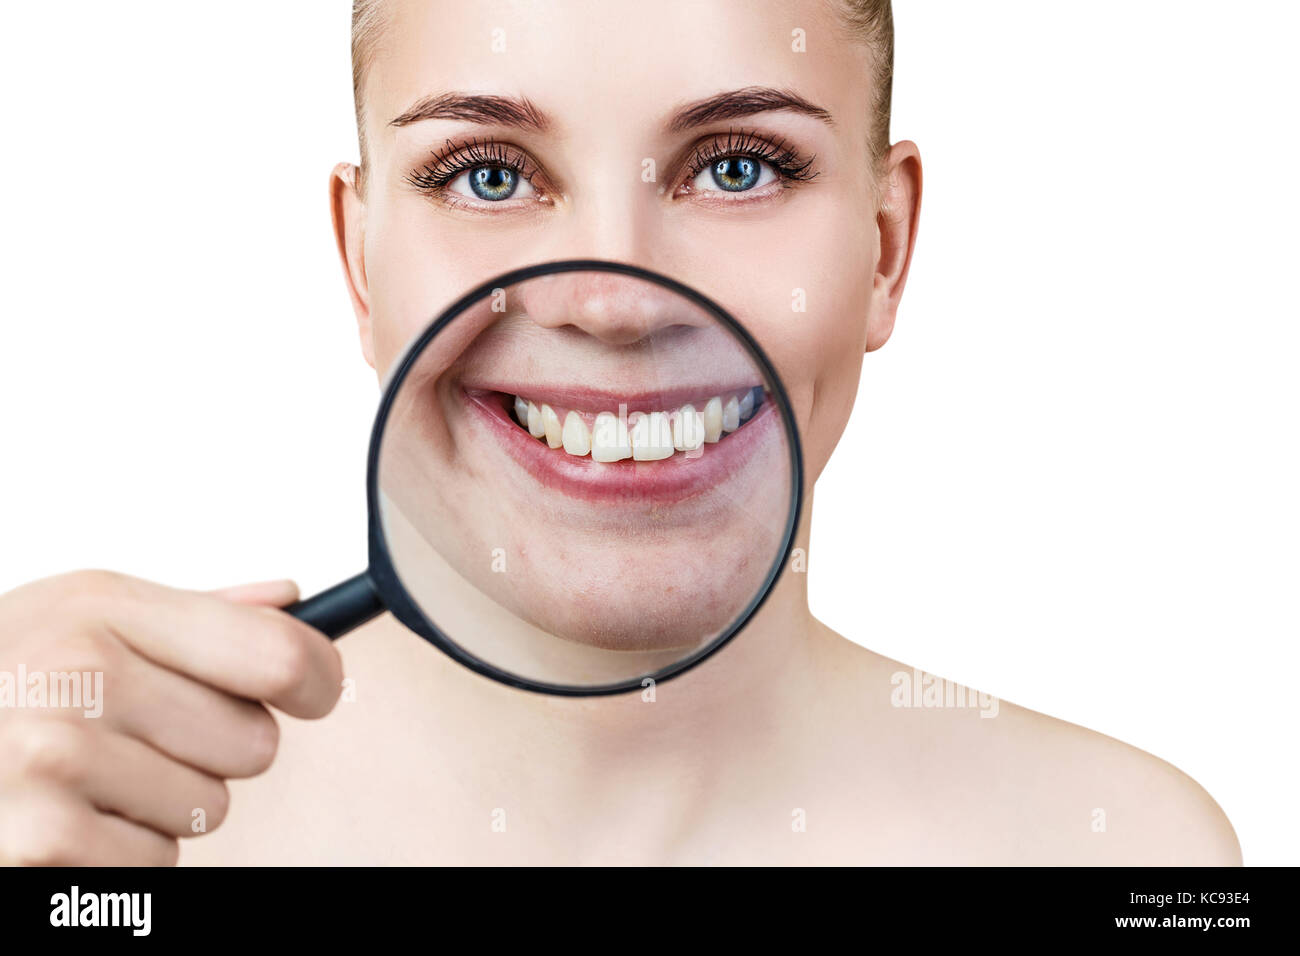 Woman with magnifying glass presents white teeth. Stock Photo